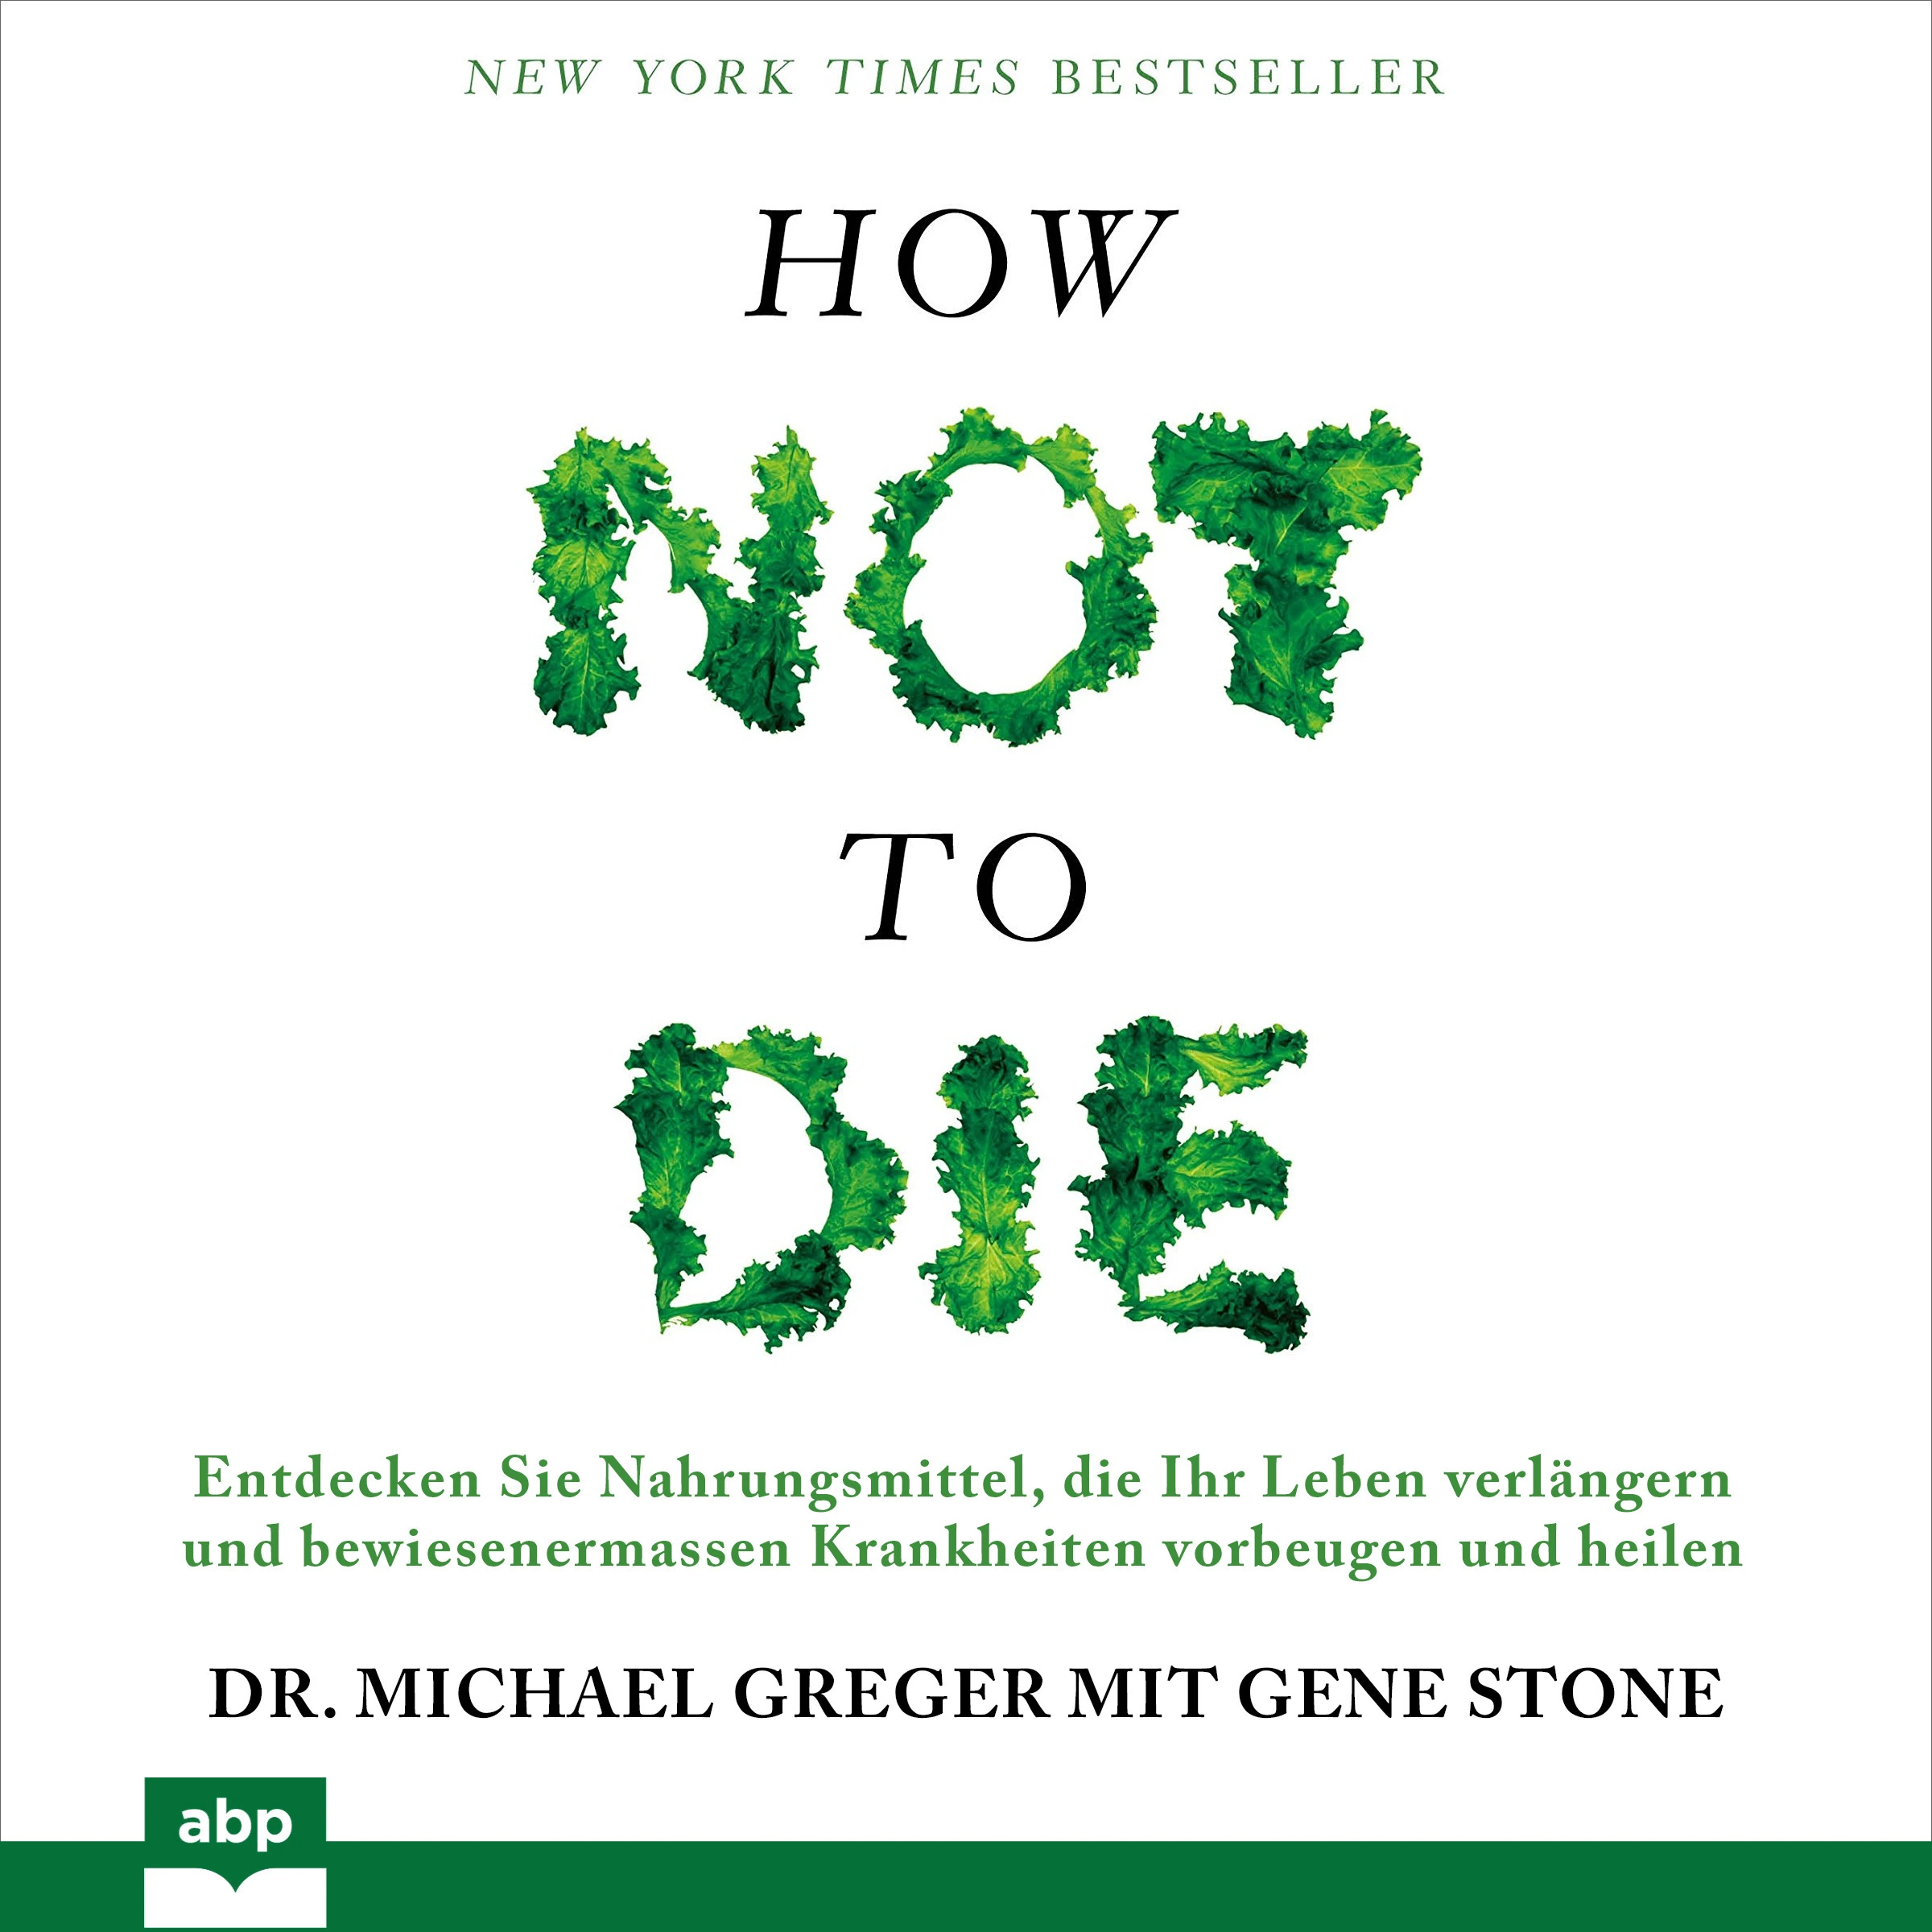 How Not to Die Audiobook by Gene Stone